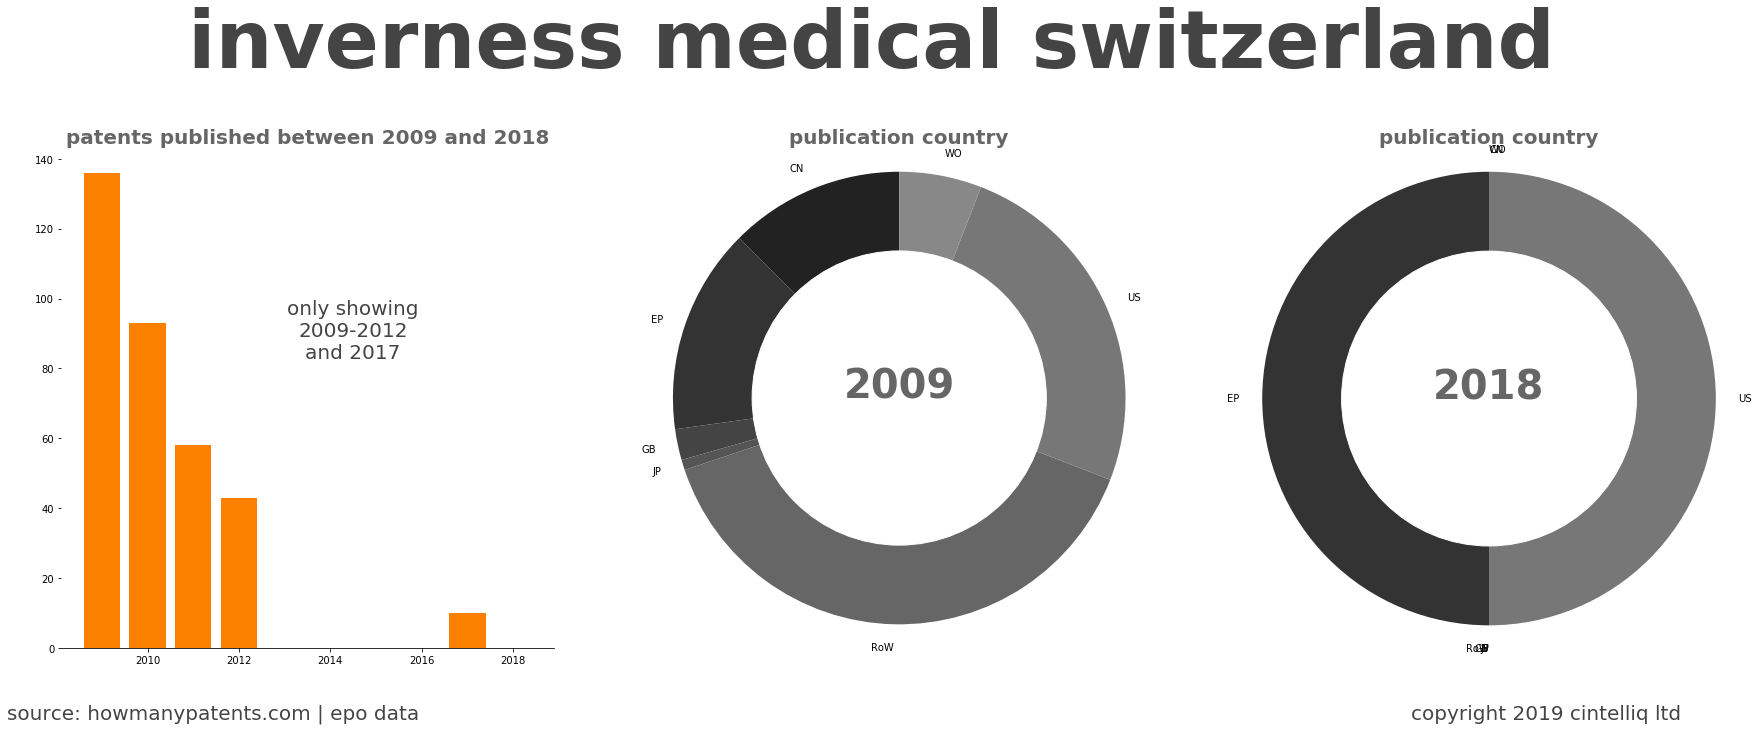 summary of patents for Inverness Medical Switzerland